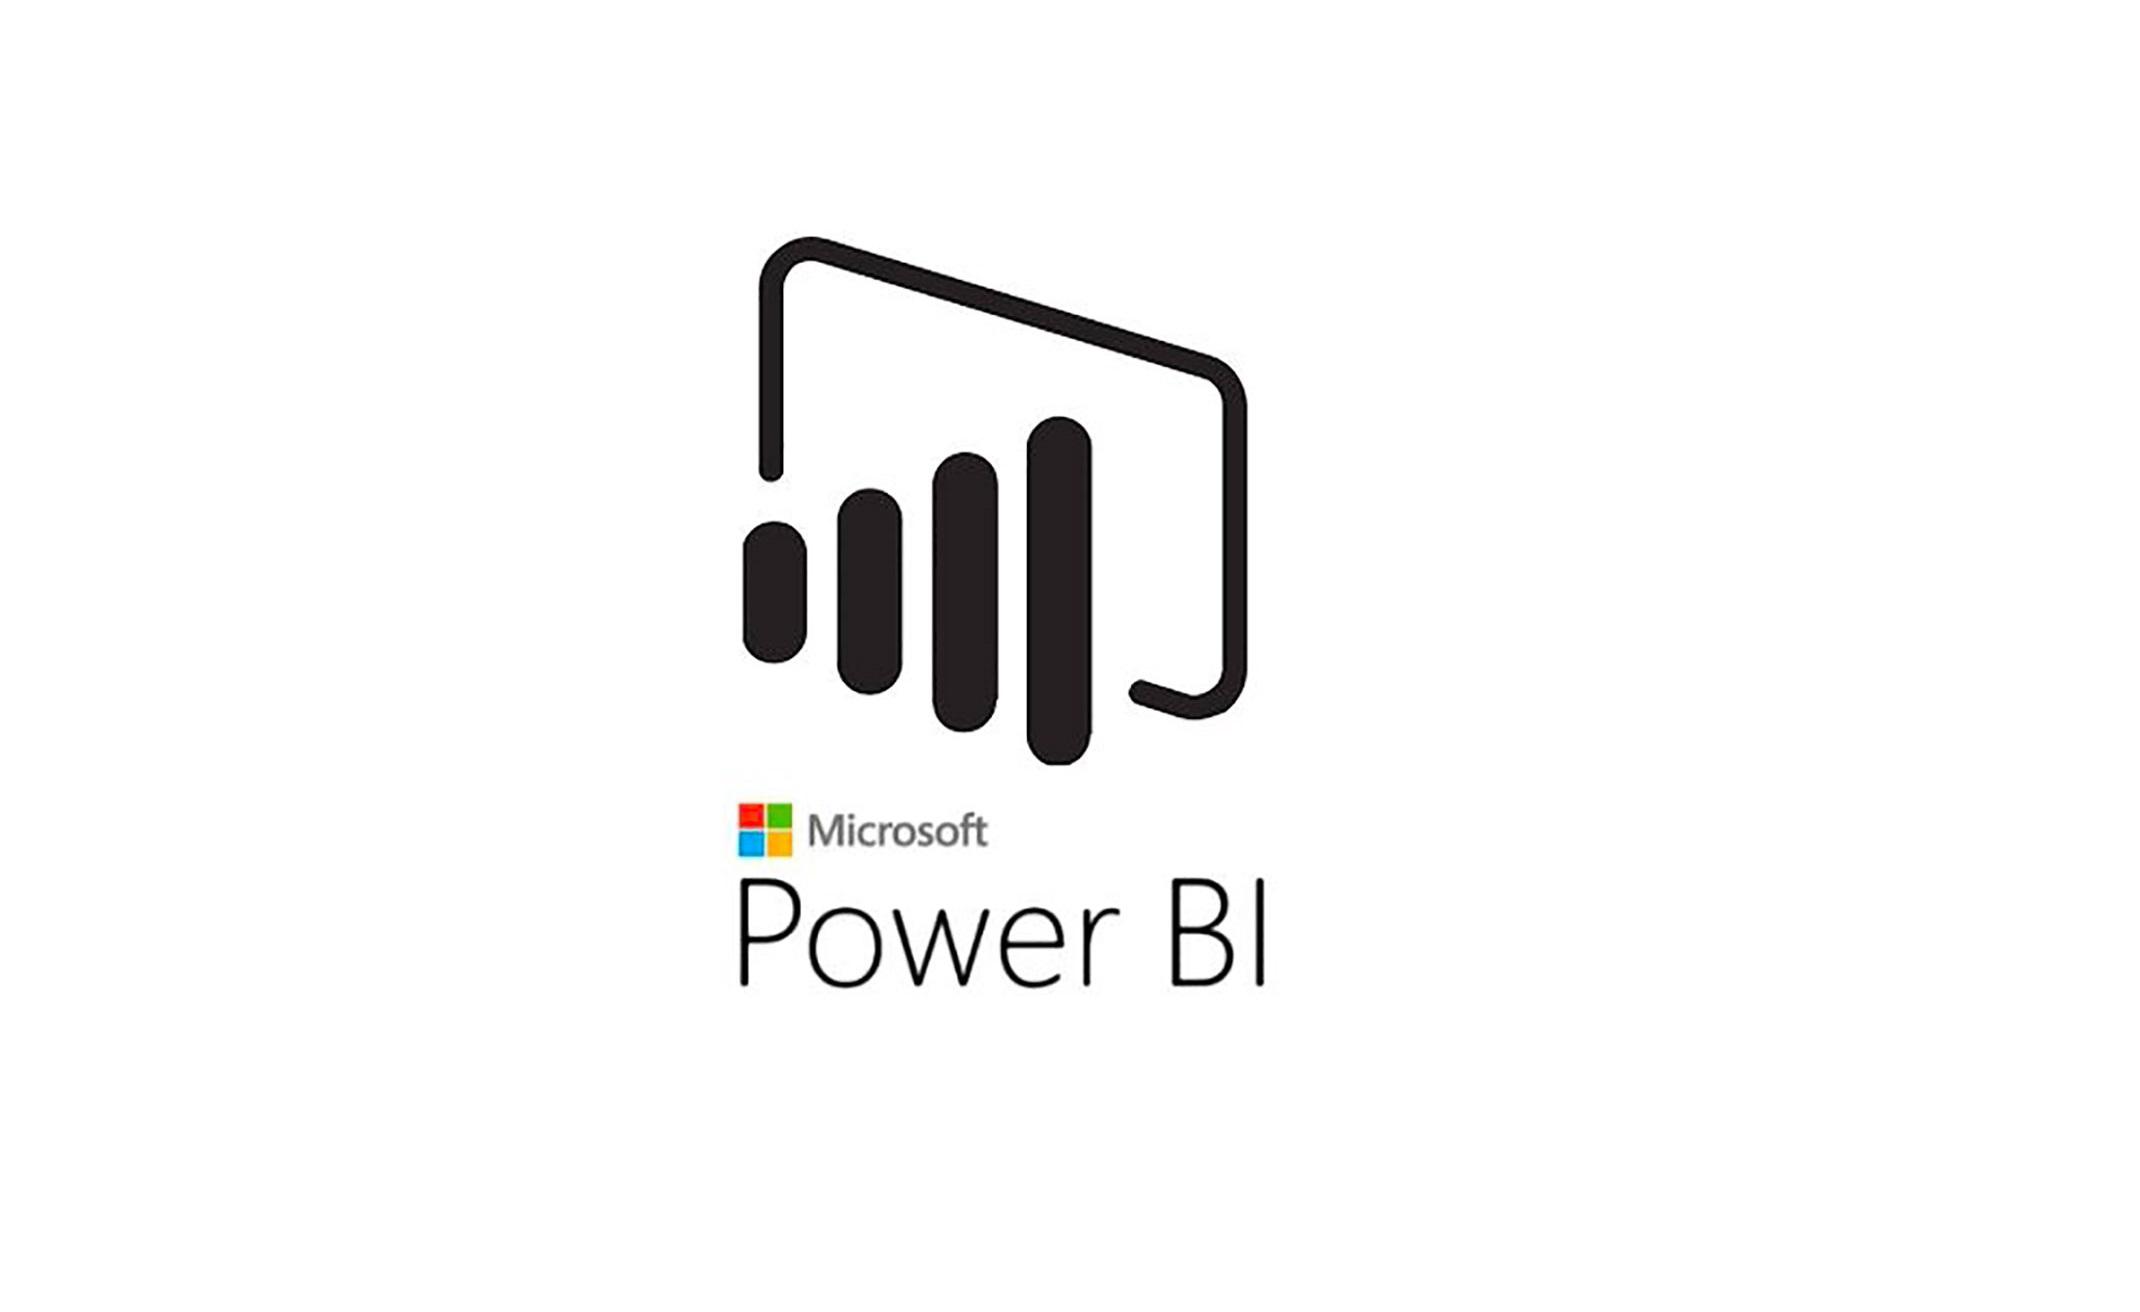 4 Weeks Microsoft Power BI Training in Sunshine Coast | Introduction to Power BI training for beginners | Getting started with Power BI | What is Power BI | March 30, 2020 - April 22, 2020